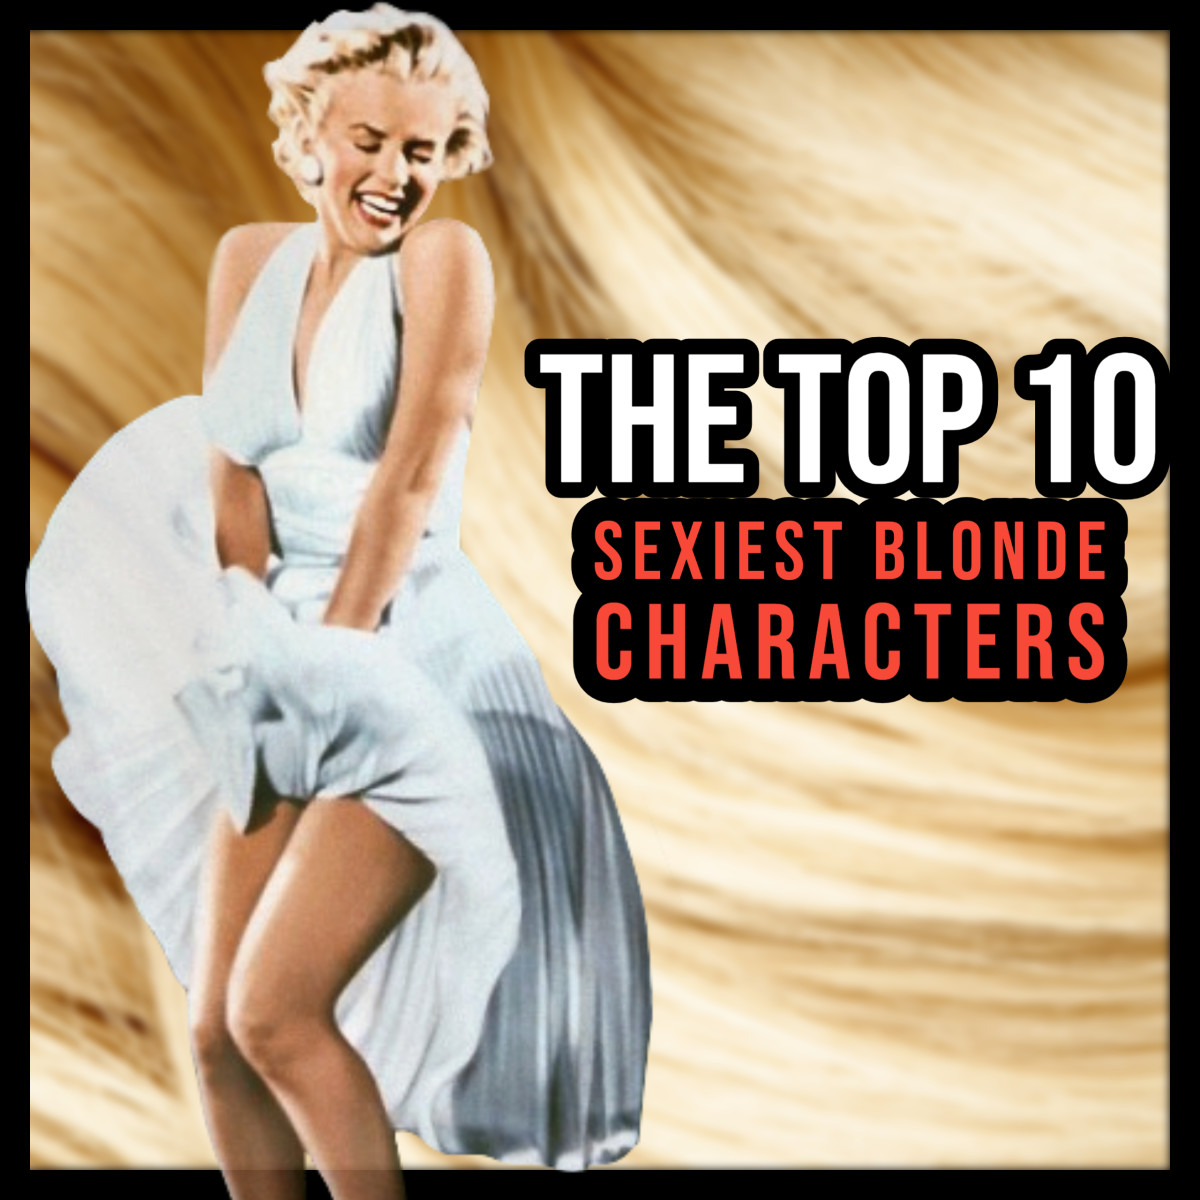 The Top 10 Sexiest Blondes in TV and Movies